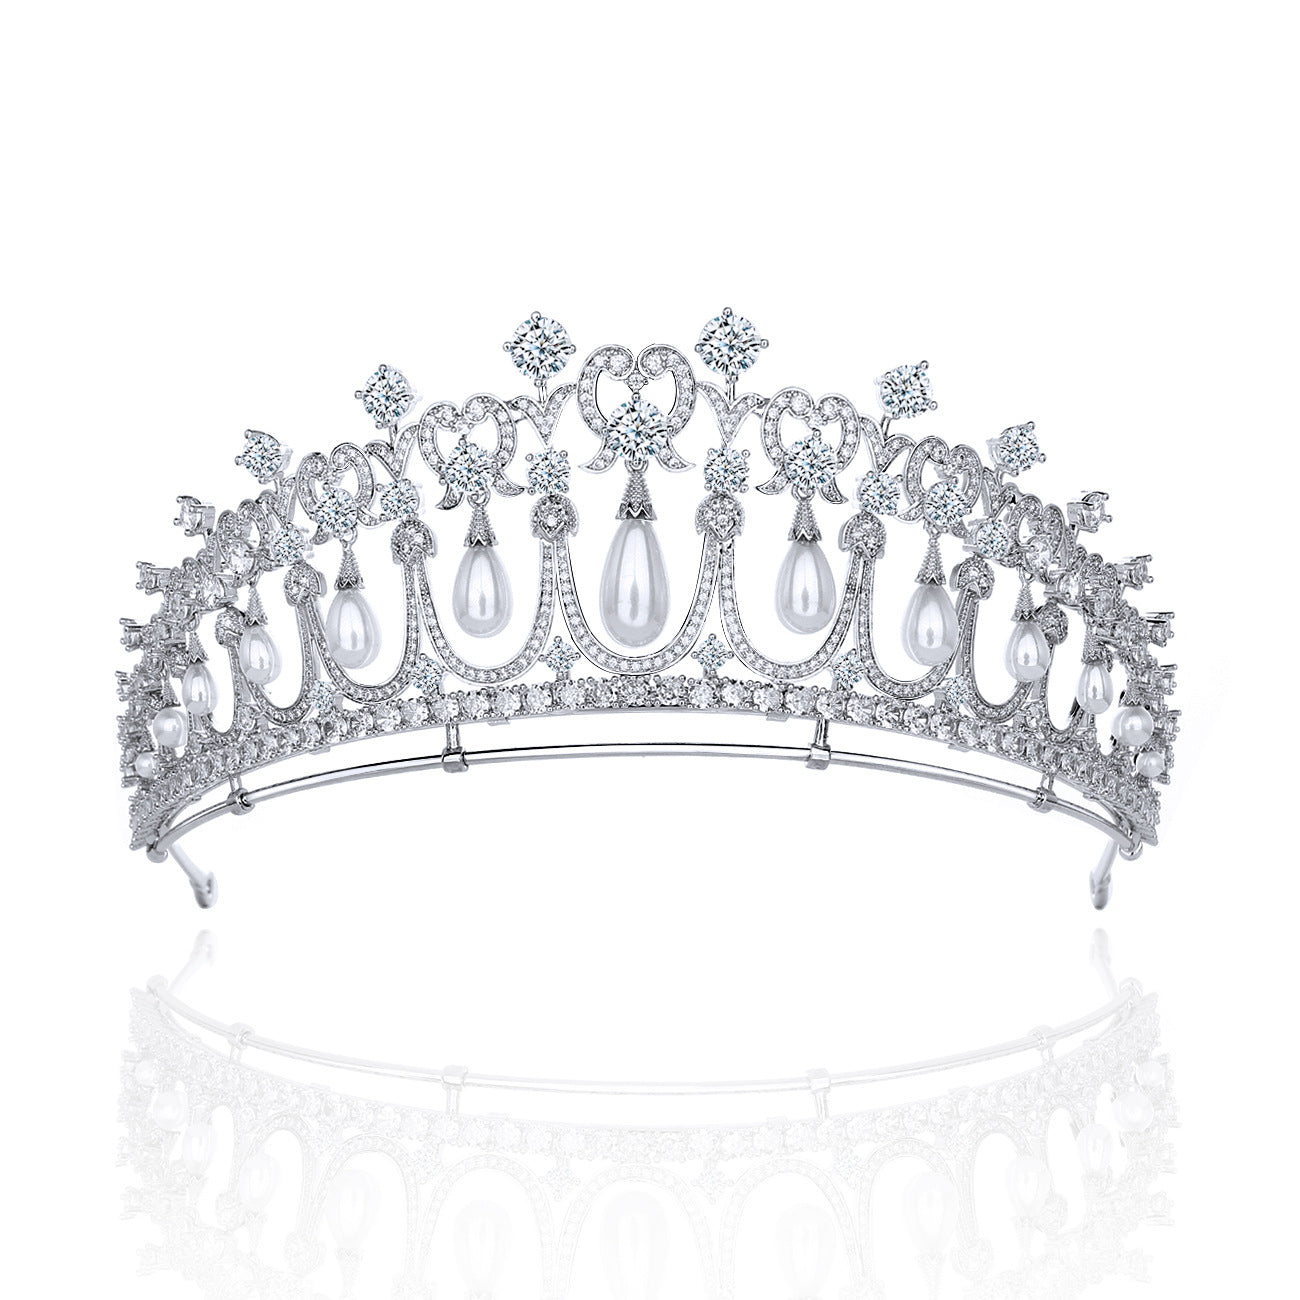 The Cambridge Lover's Knot Tiara,Classic Europe Royal Replica Pearls Tiara  for Wedding CH10018